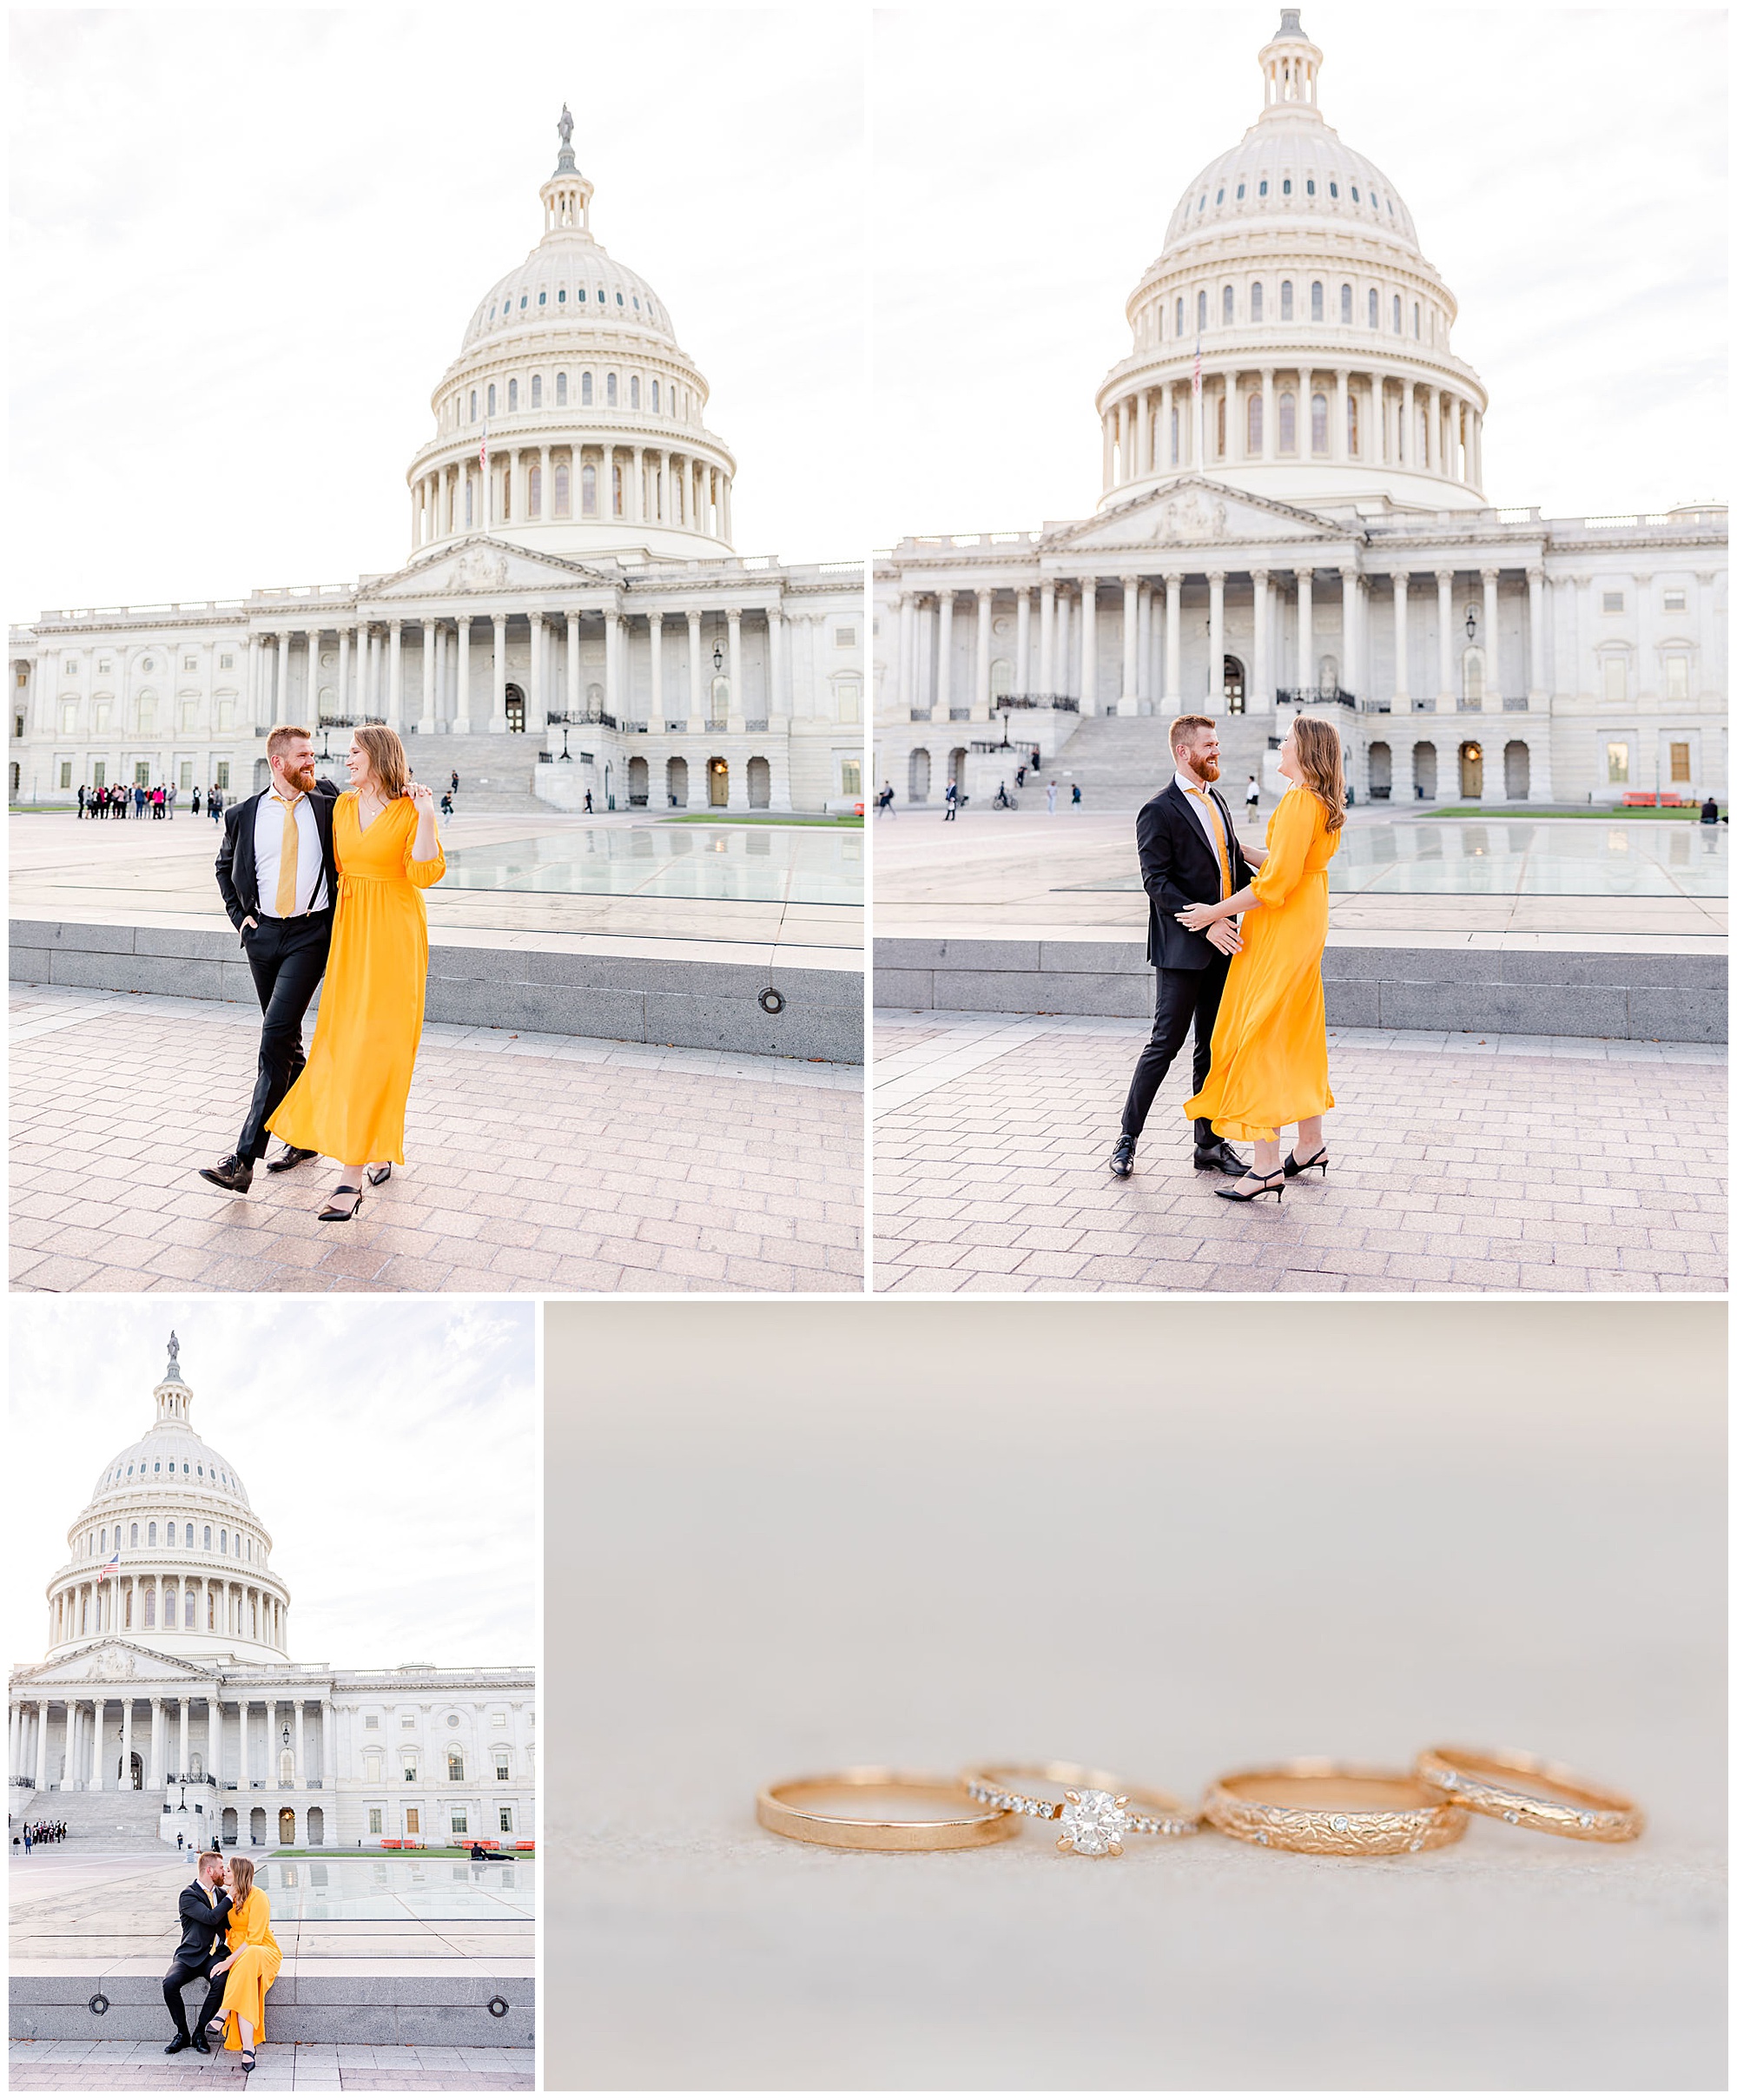 glowing Capitol Hill elopement portraits, Capitol Hill Washington DC, DC elopement portraits, DC elopement photographer, DC wedding photographer, DC portrait photographer, DC photographer, Capitol Hill portraits, autumn portraits, Capitol Hill photographer, Rachel E.H. Photography, rose gold wedding rings, couple with arms around each other, couple sitting on edge of water